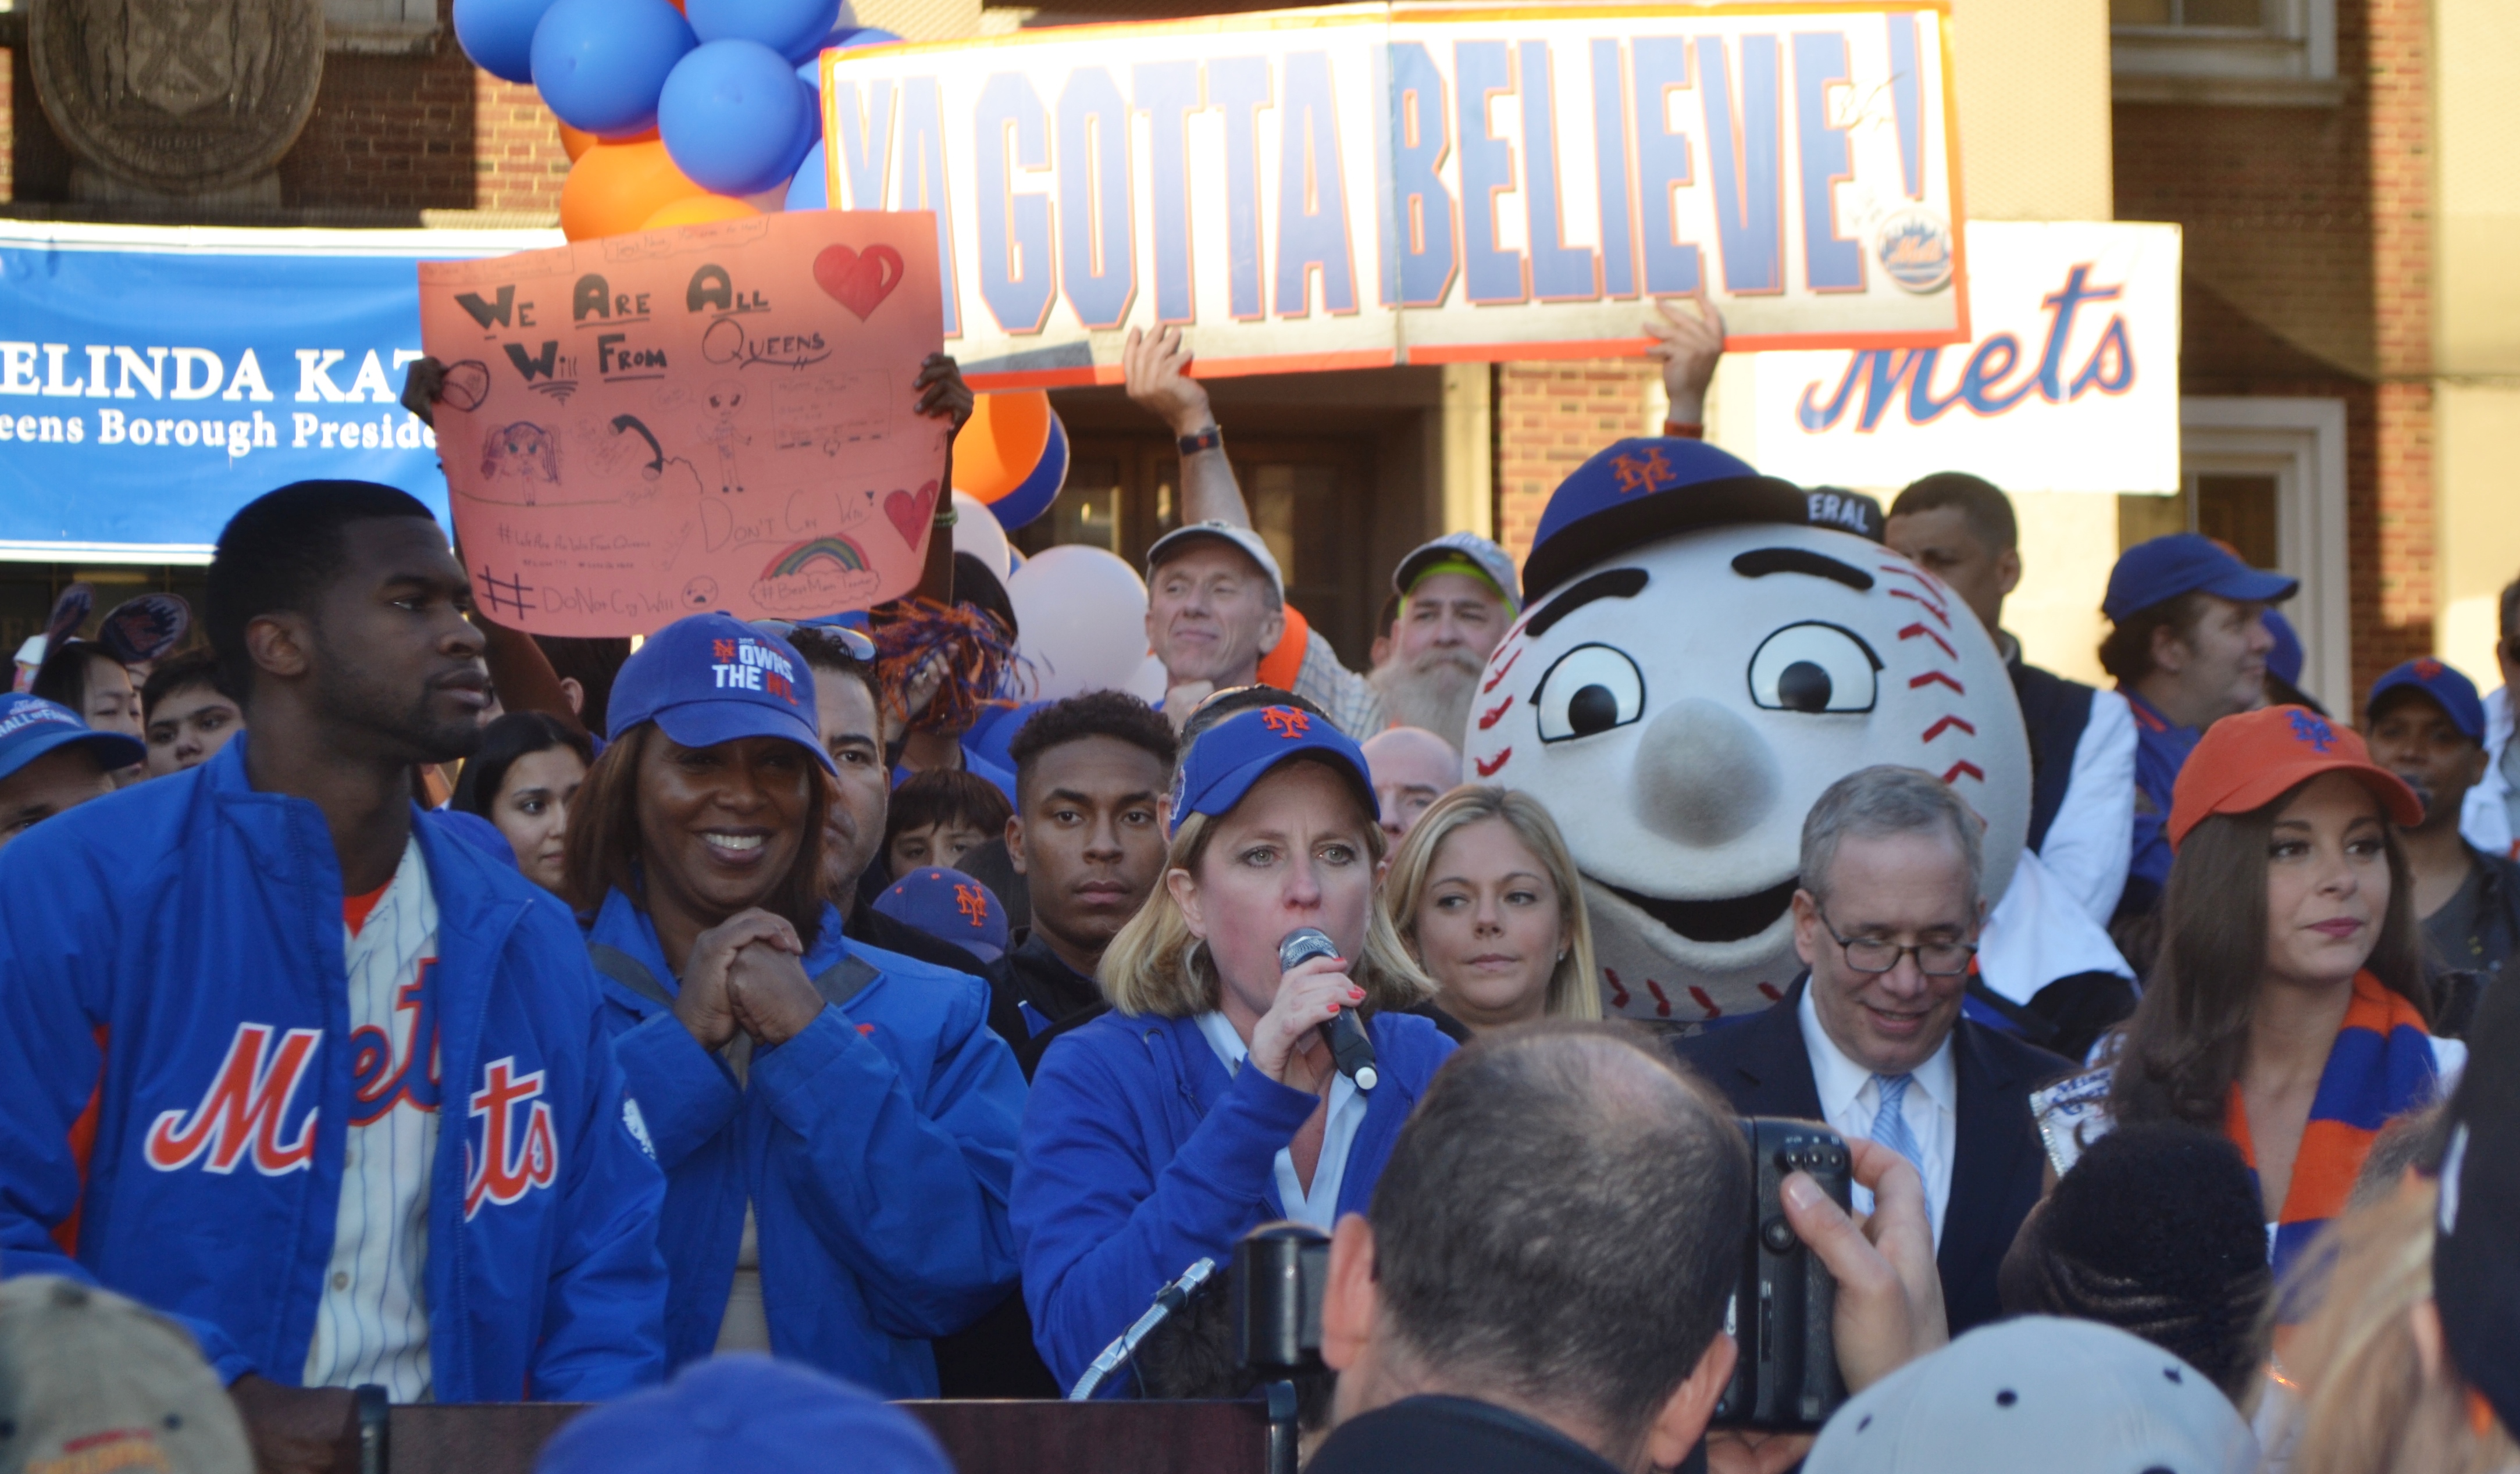 Mets fans gathered at Queens Borough Hall to celebrate the Mets World Series run.